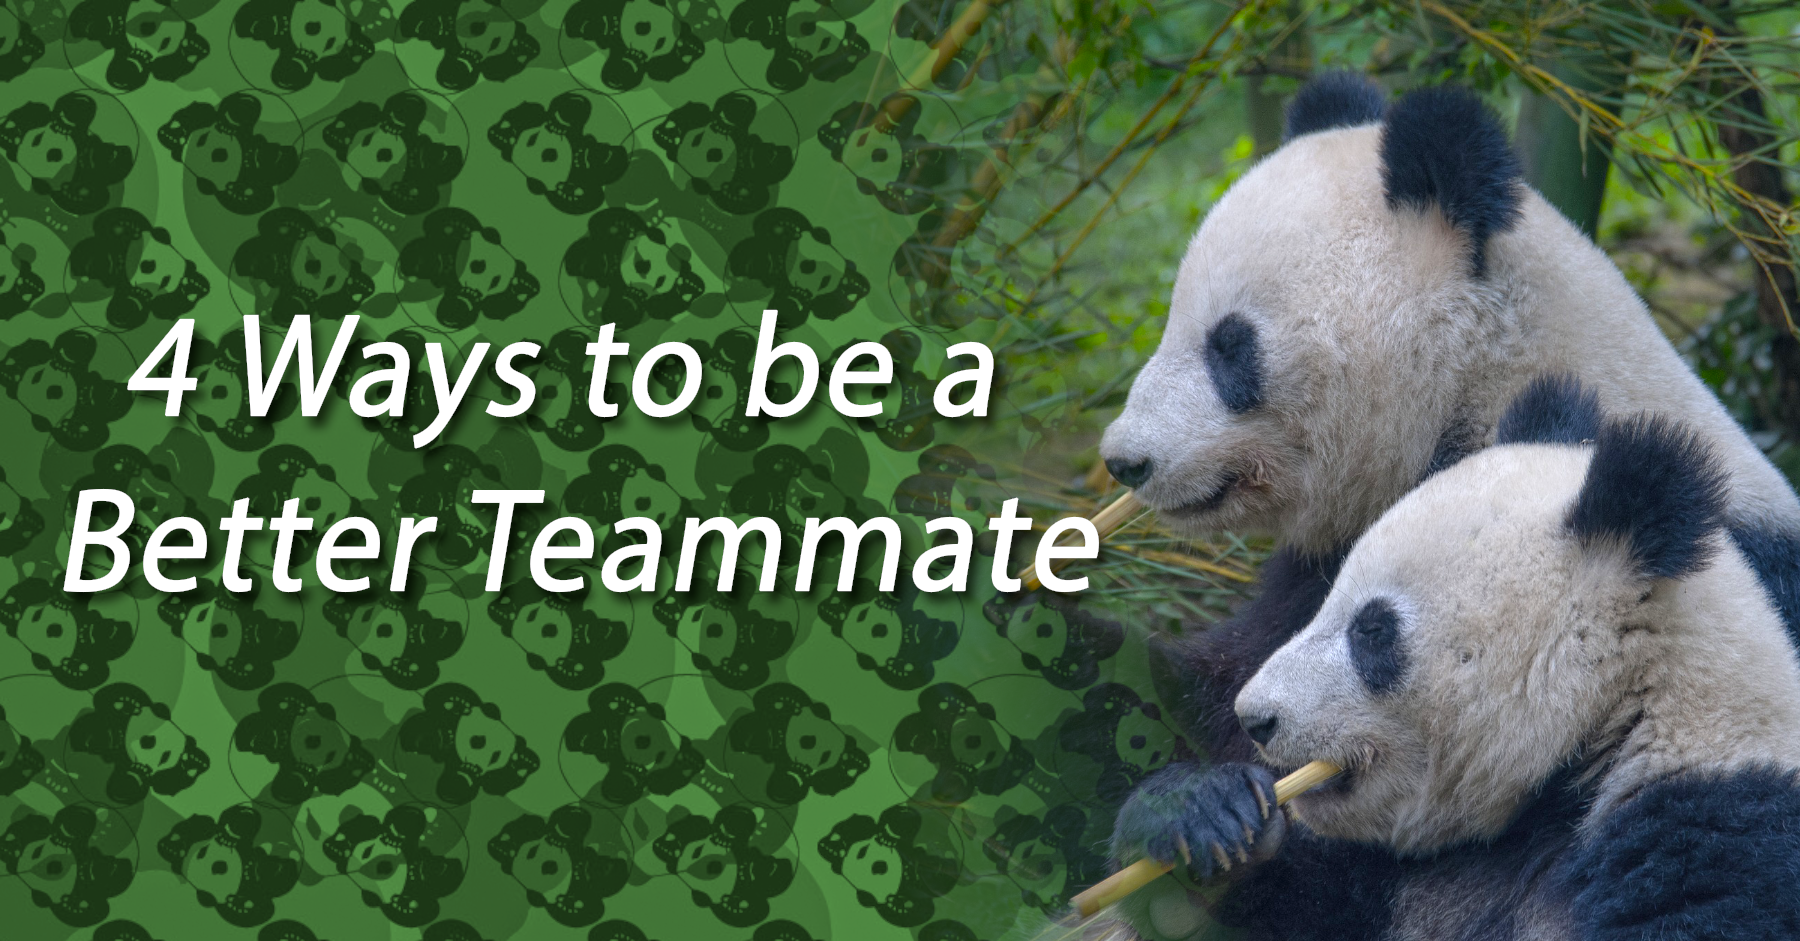 4 Ways to be a Better Teammate